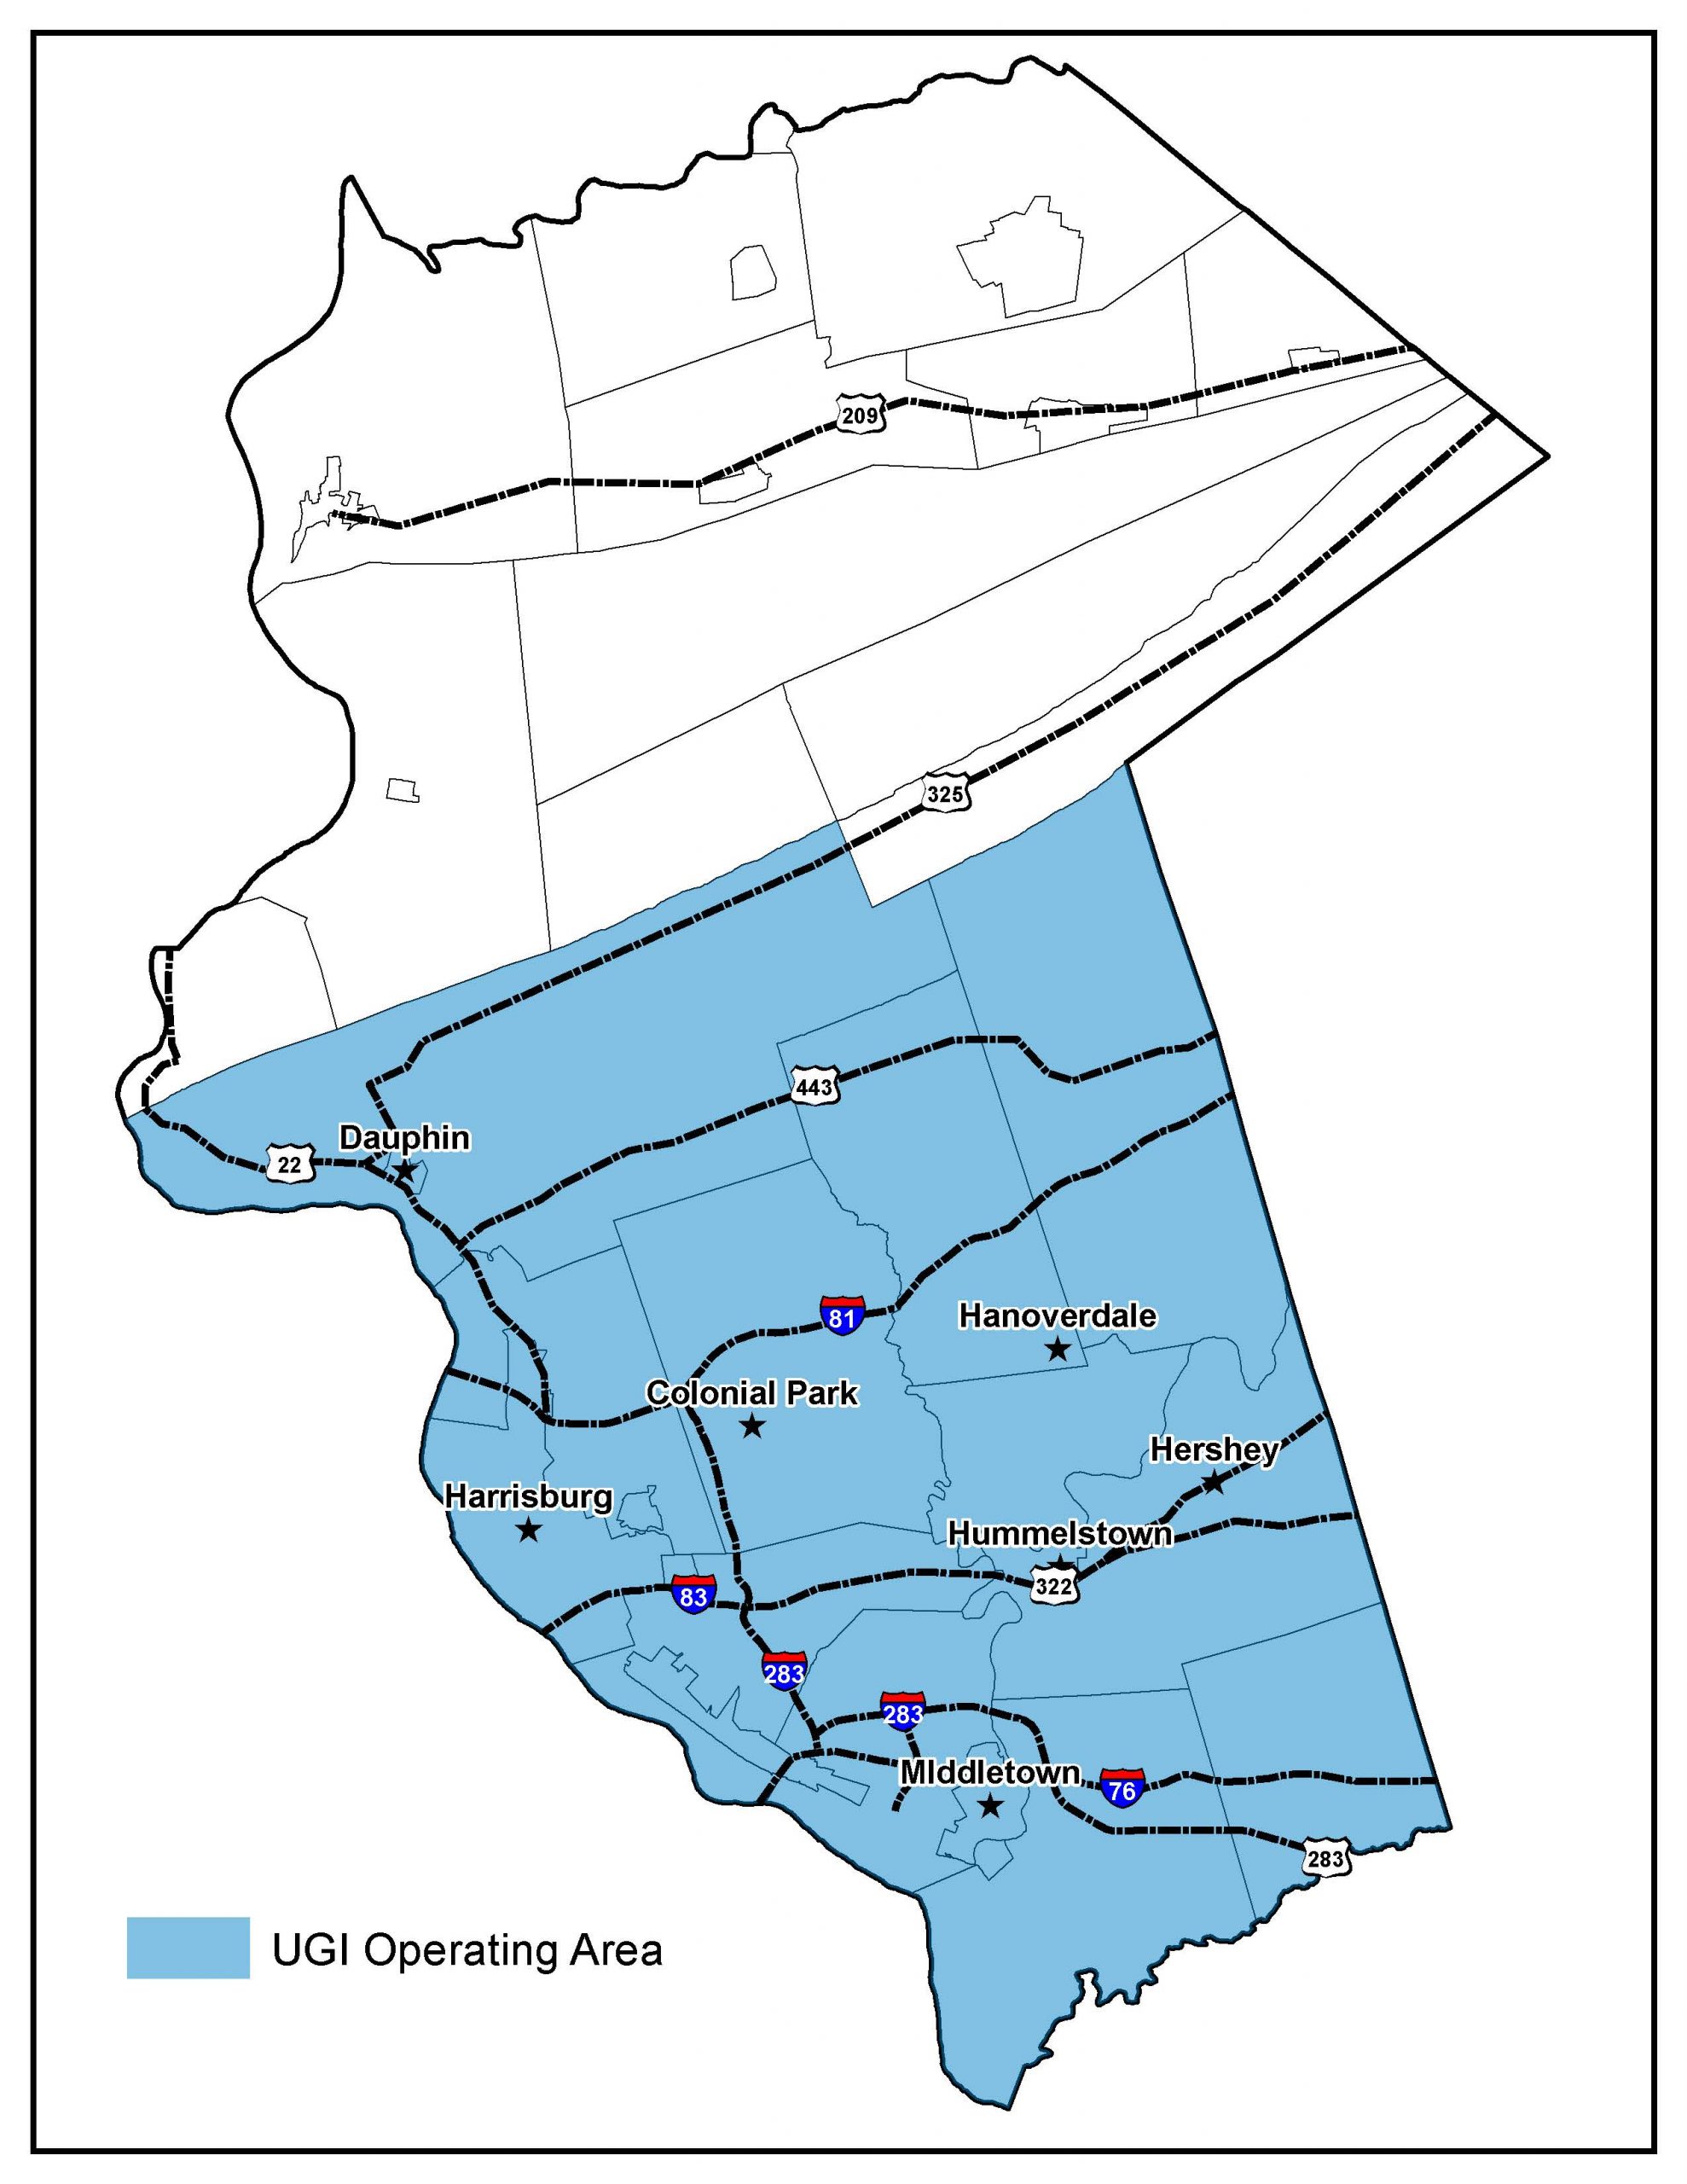 Map of Dauphin County PA with some of the major towns and cities such as Harrisburg, Dauphin, Colonial Park, Hanoverdale, Hershey, Hummelstown, and Middletown. UGI gas territory is shaded blue.